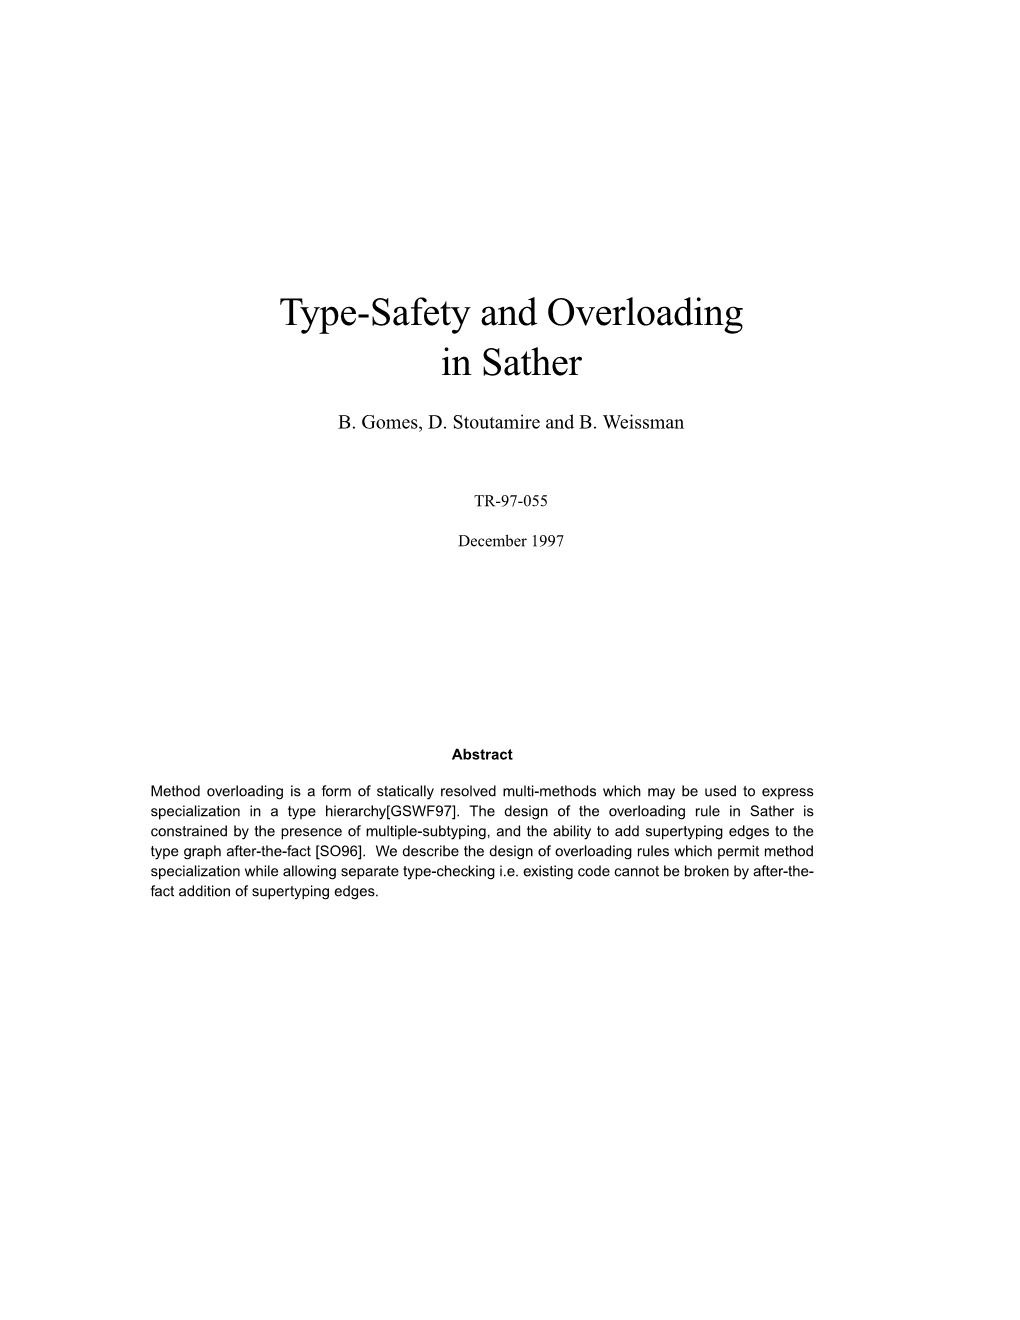 Type-Safety and Overloading in Sather